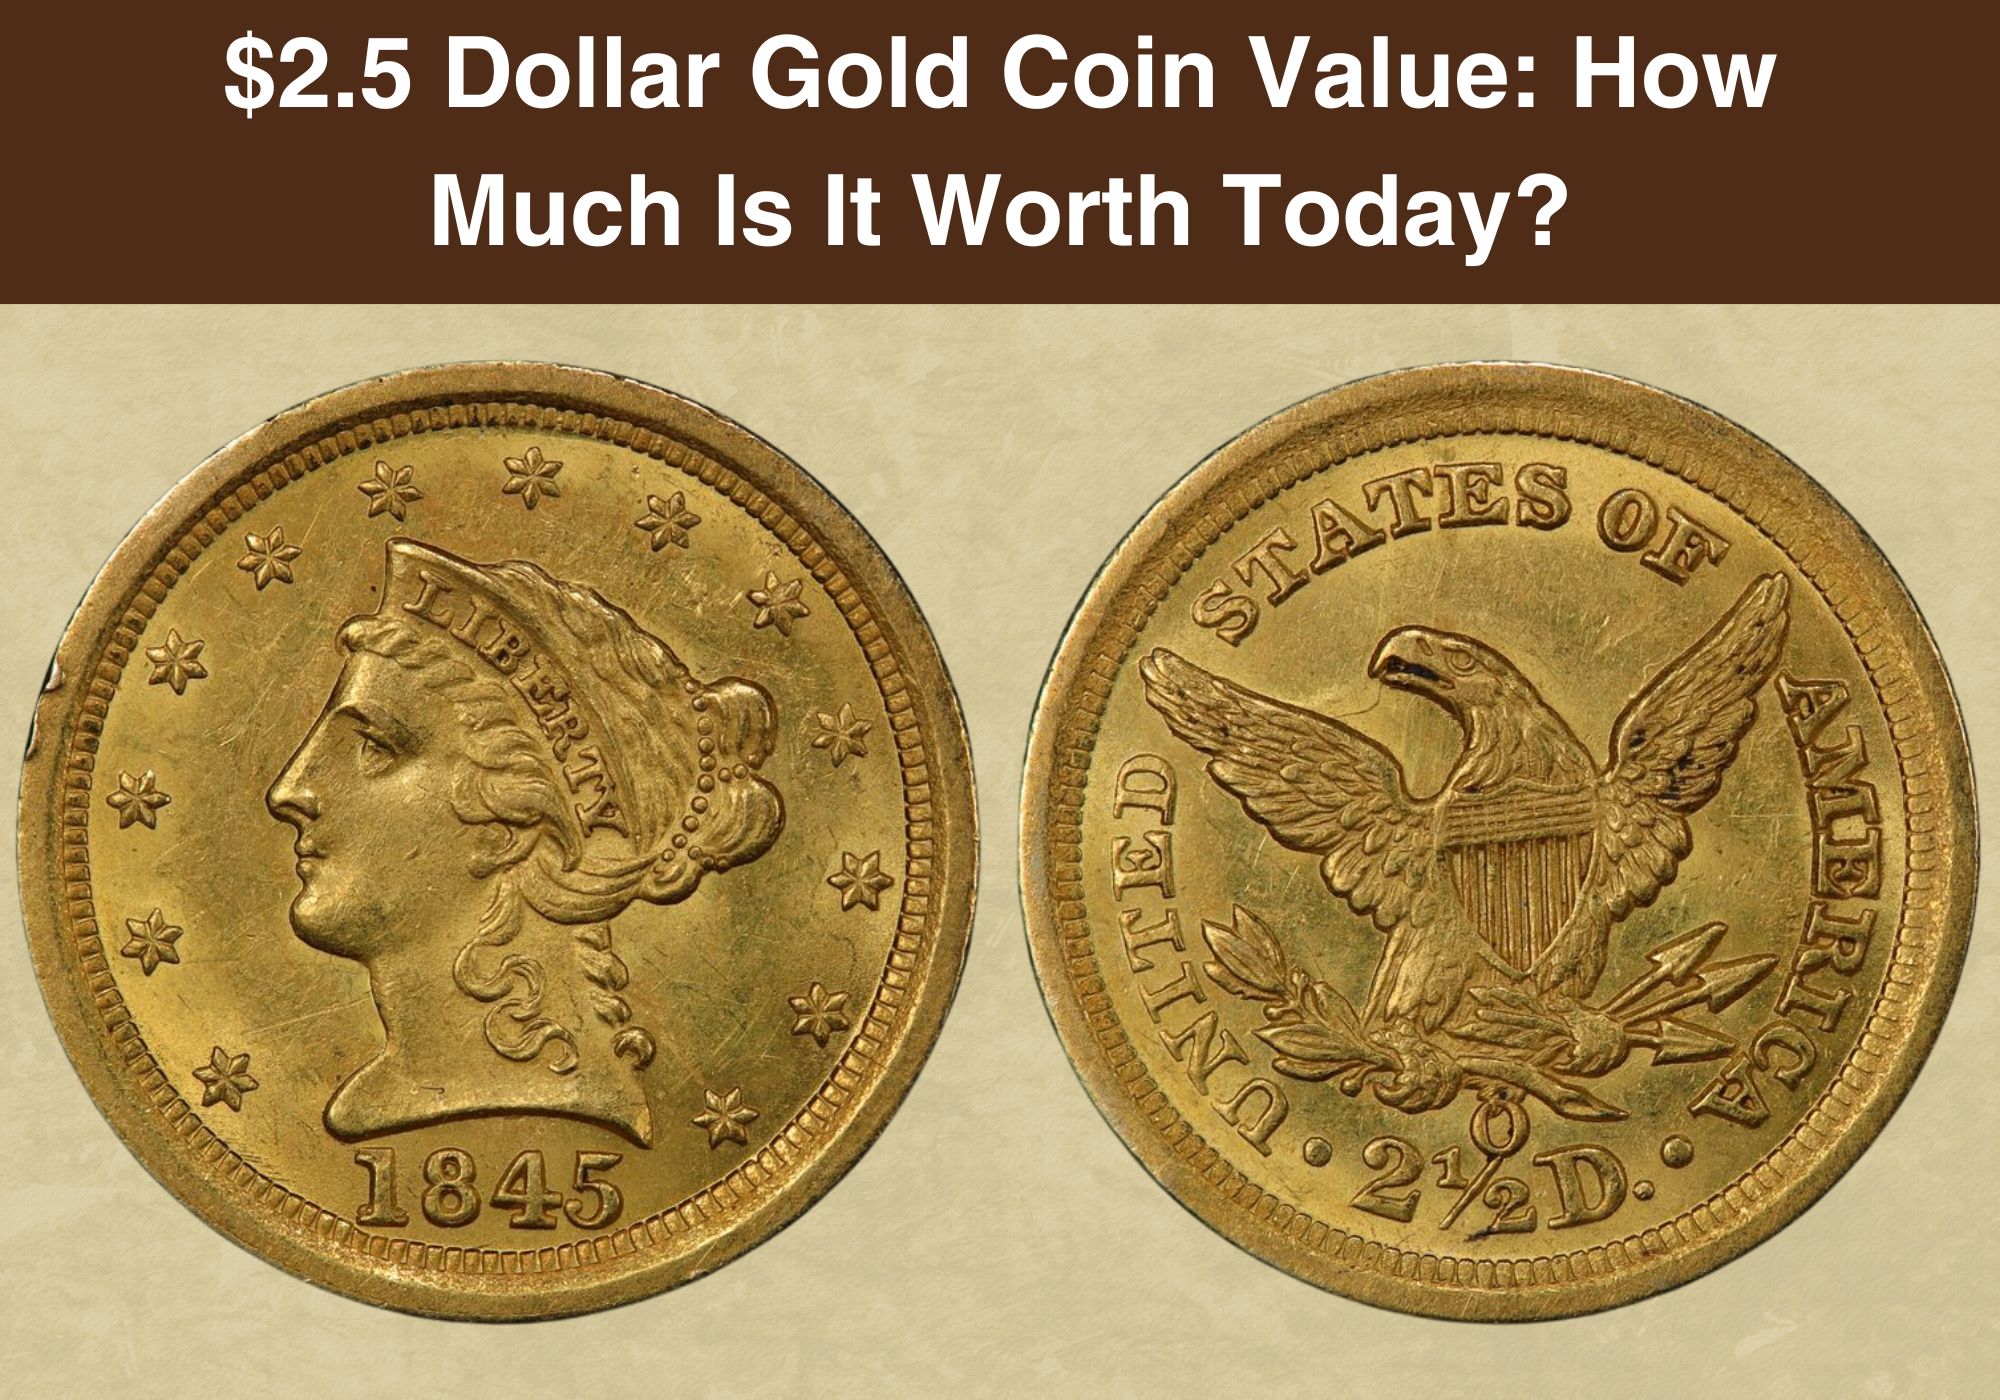 $2.5 Dollar Gold Coin Value How Much Is It Worth Today